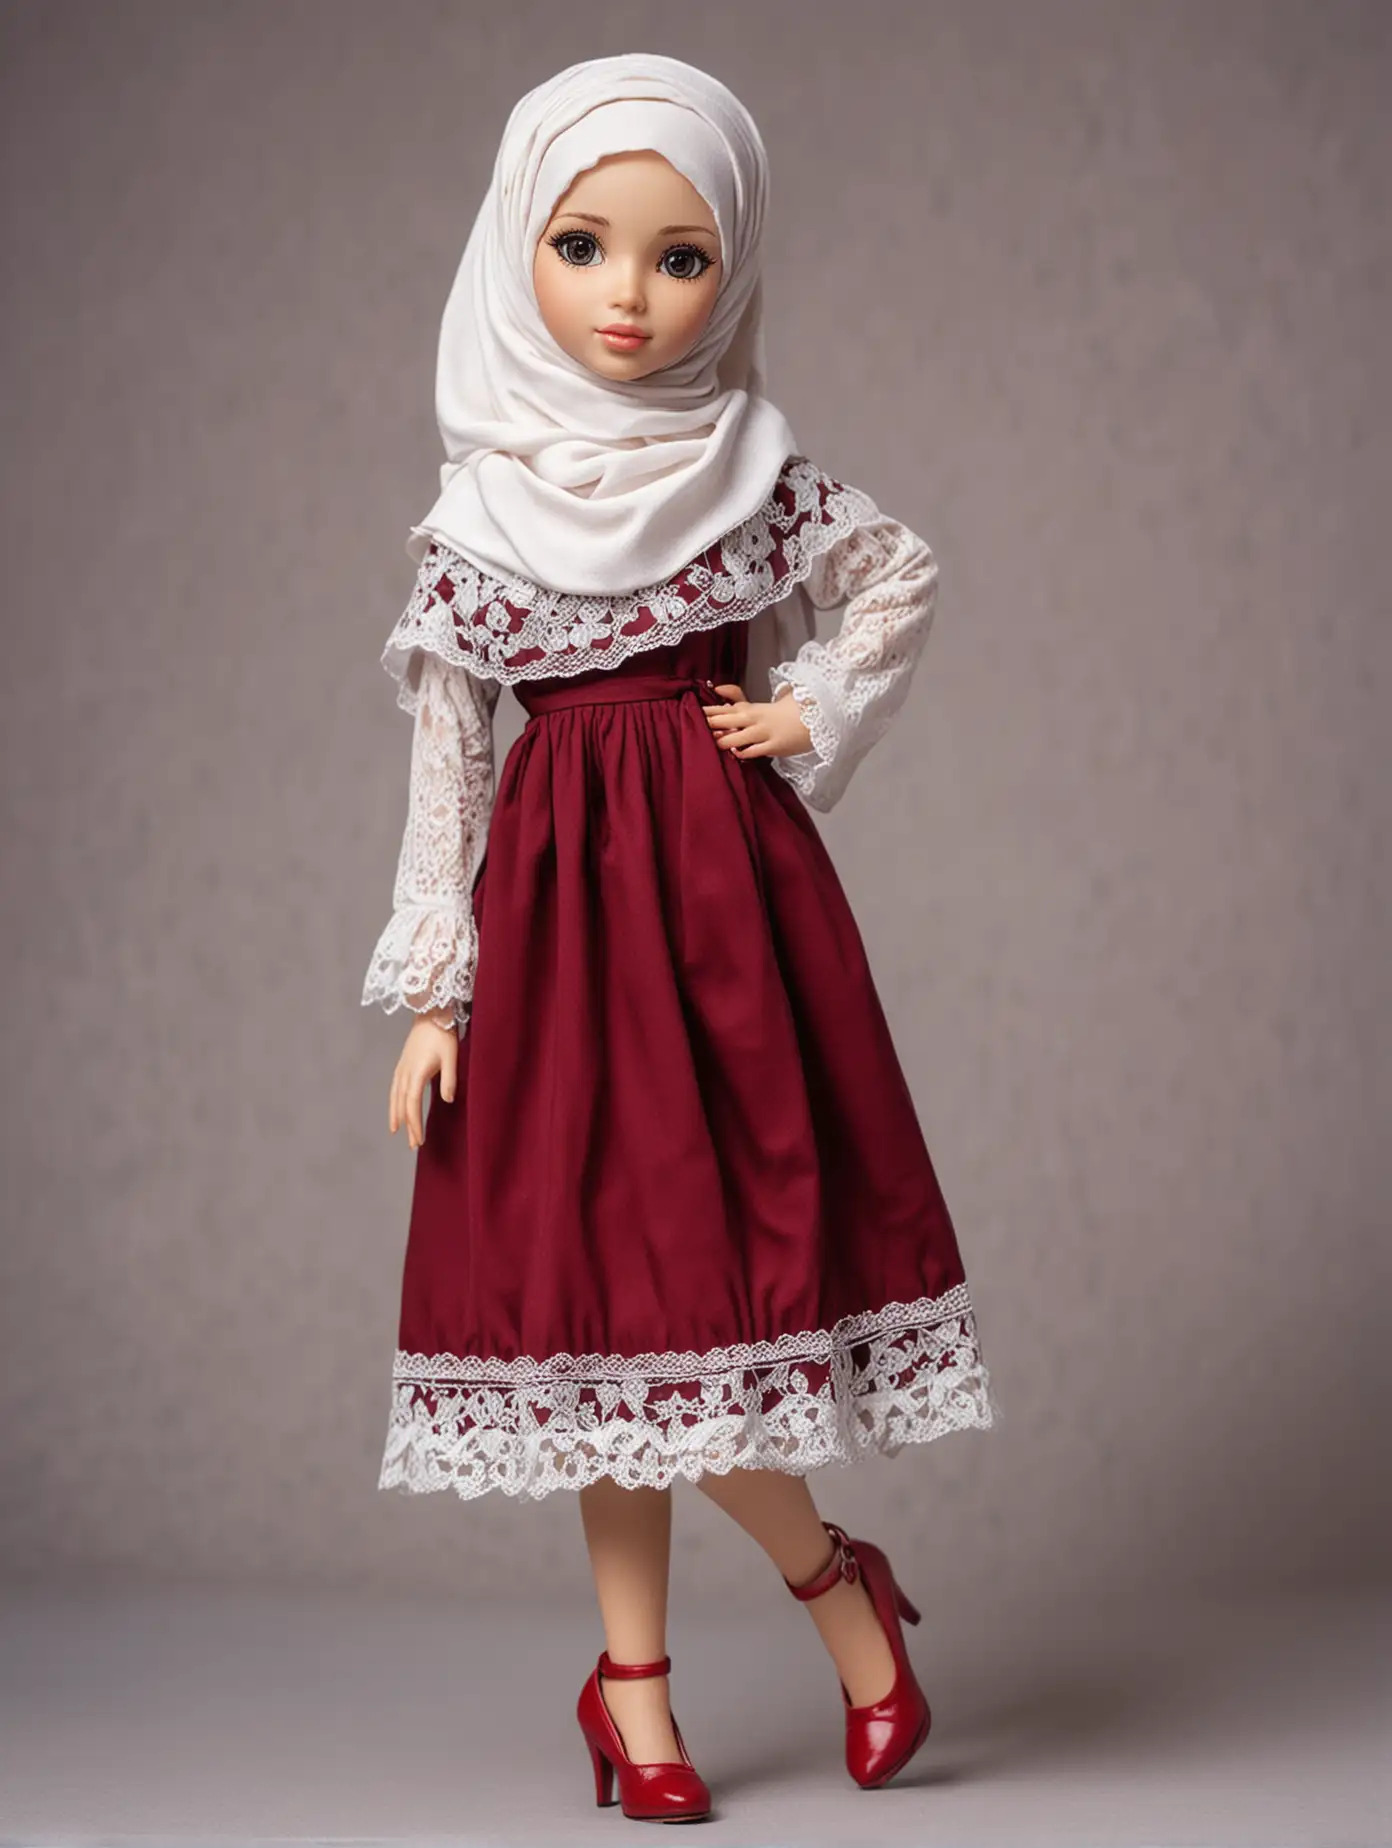 Elegant Teenage Doll in Hijab with Maroon Dress and Red Shoes